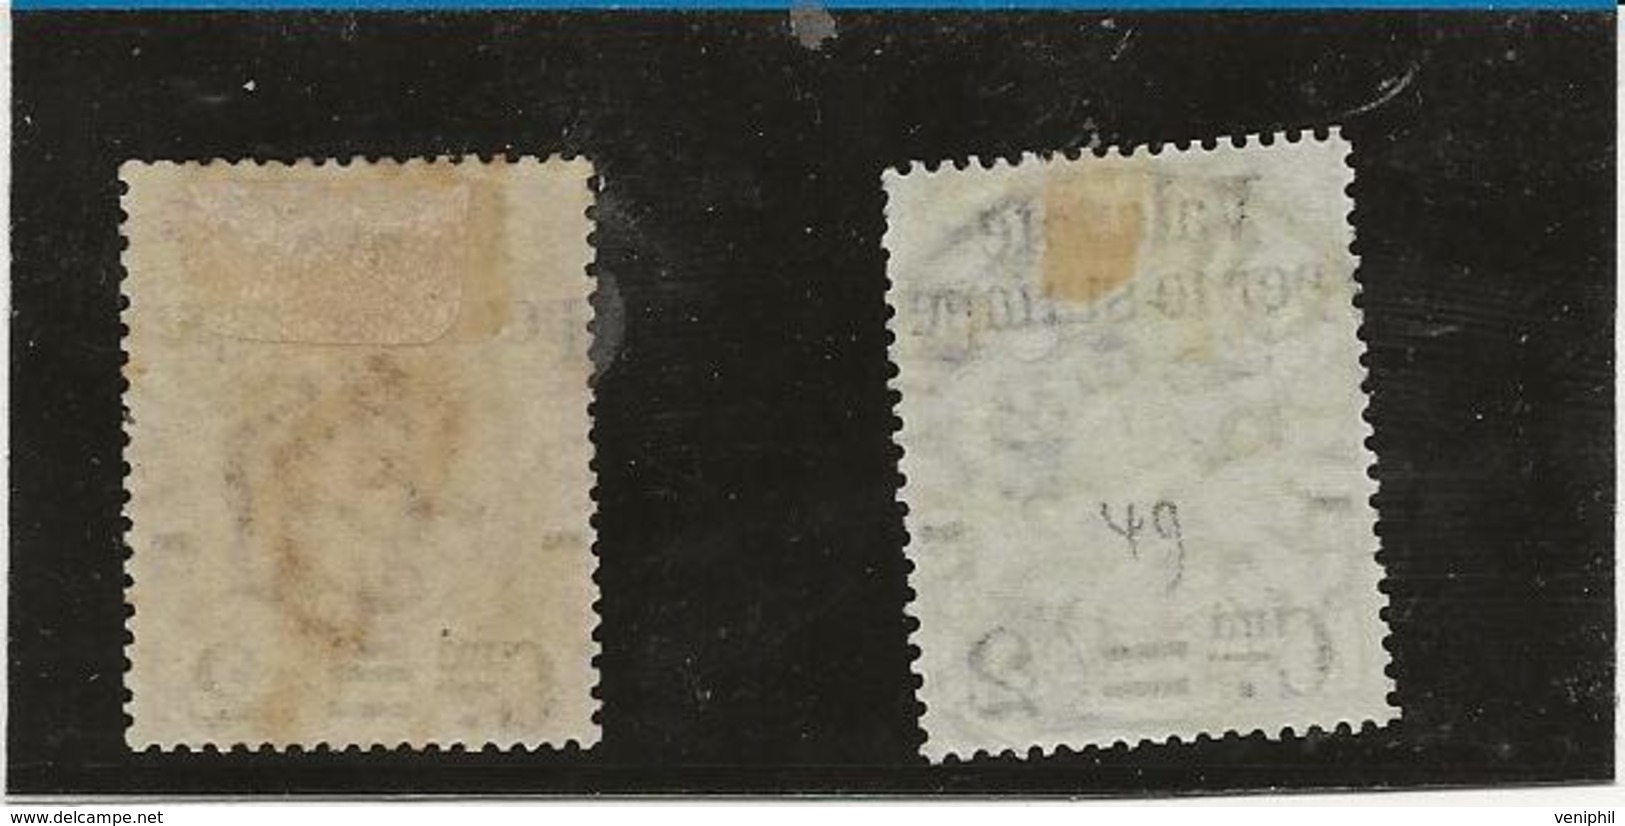 TIMBRES N° 48 NEUF S GOMME + N° 49 OBLITERE - ANNEE 1890 - COTE : 40 € - Afgestempeld